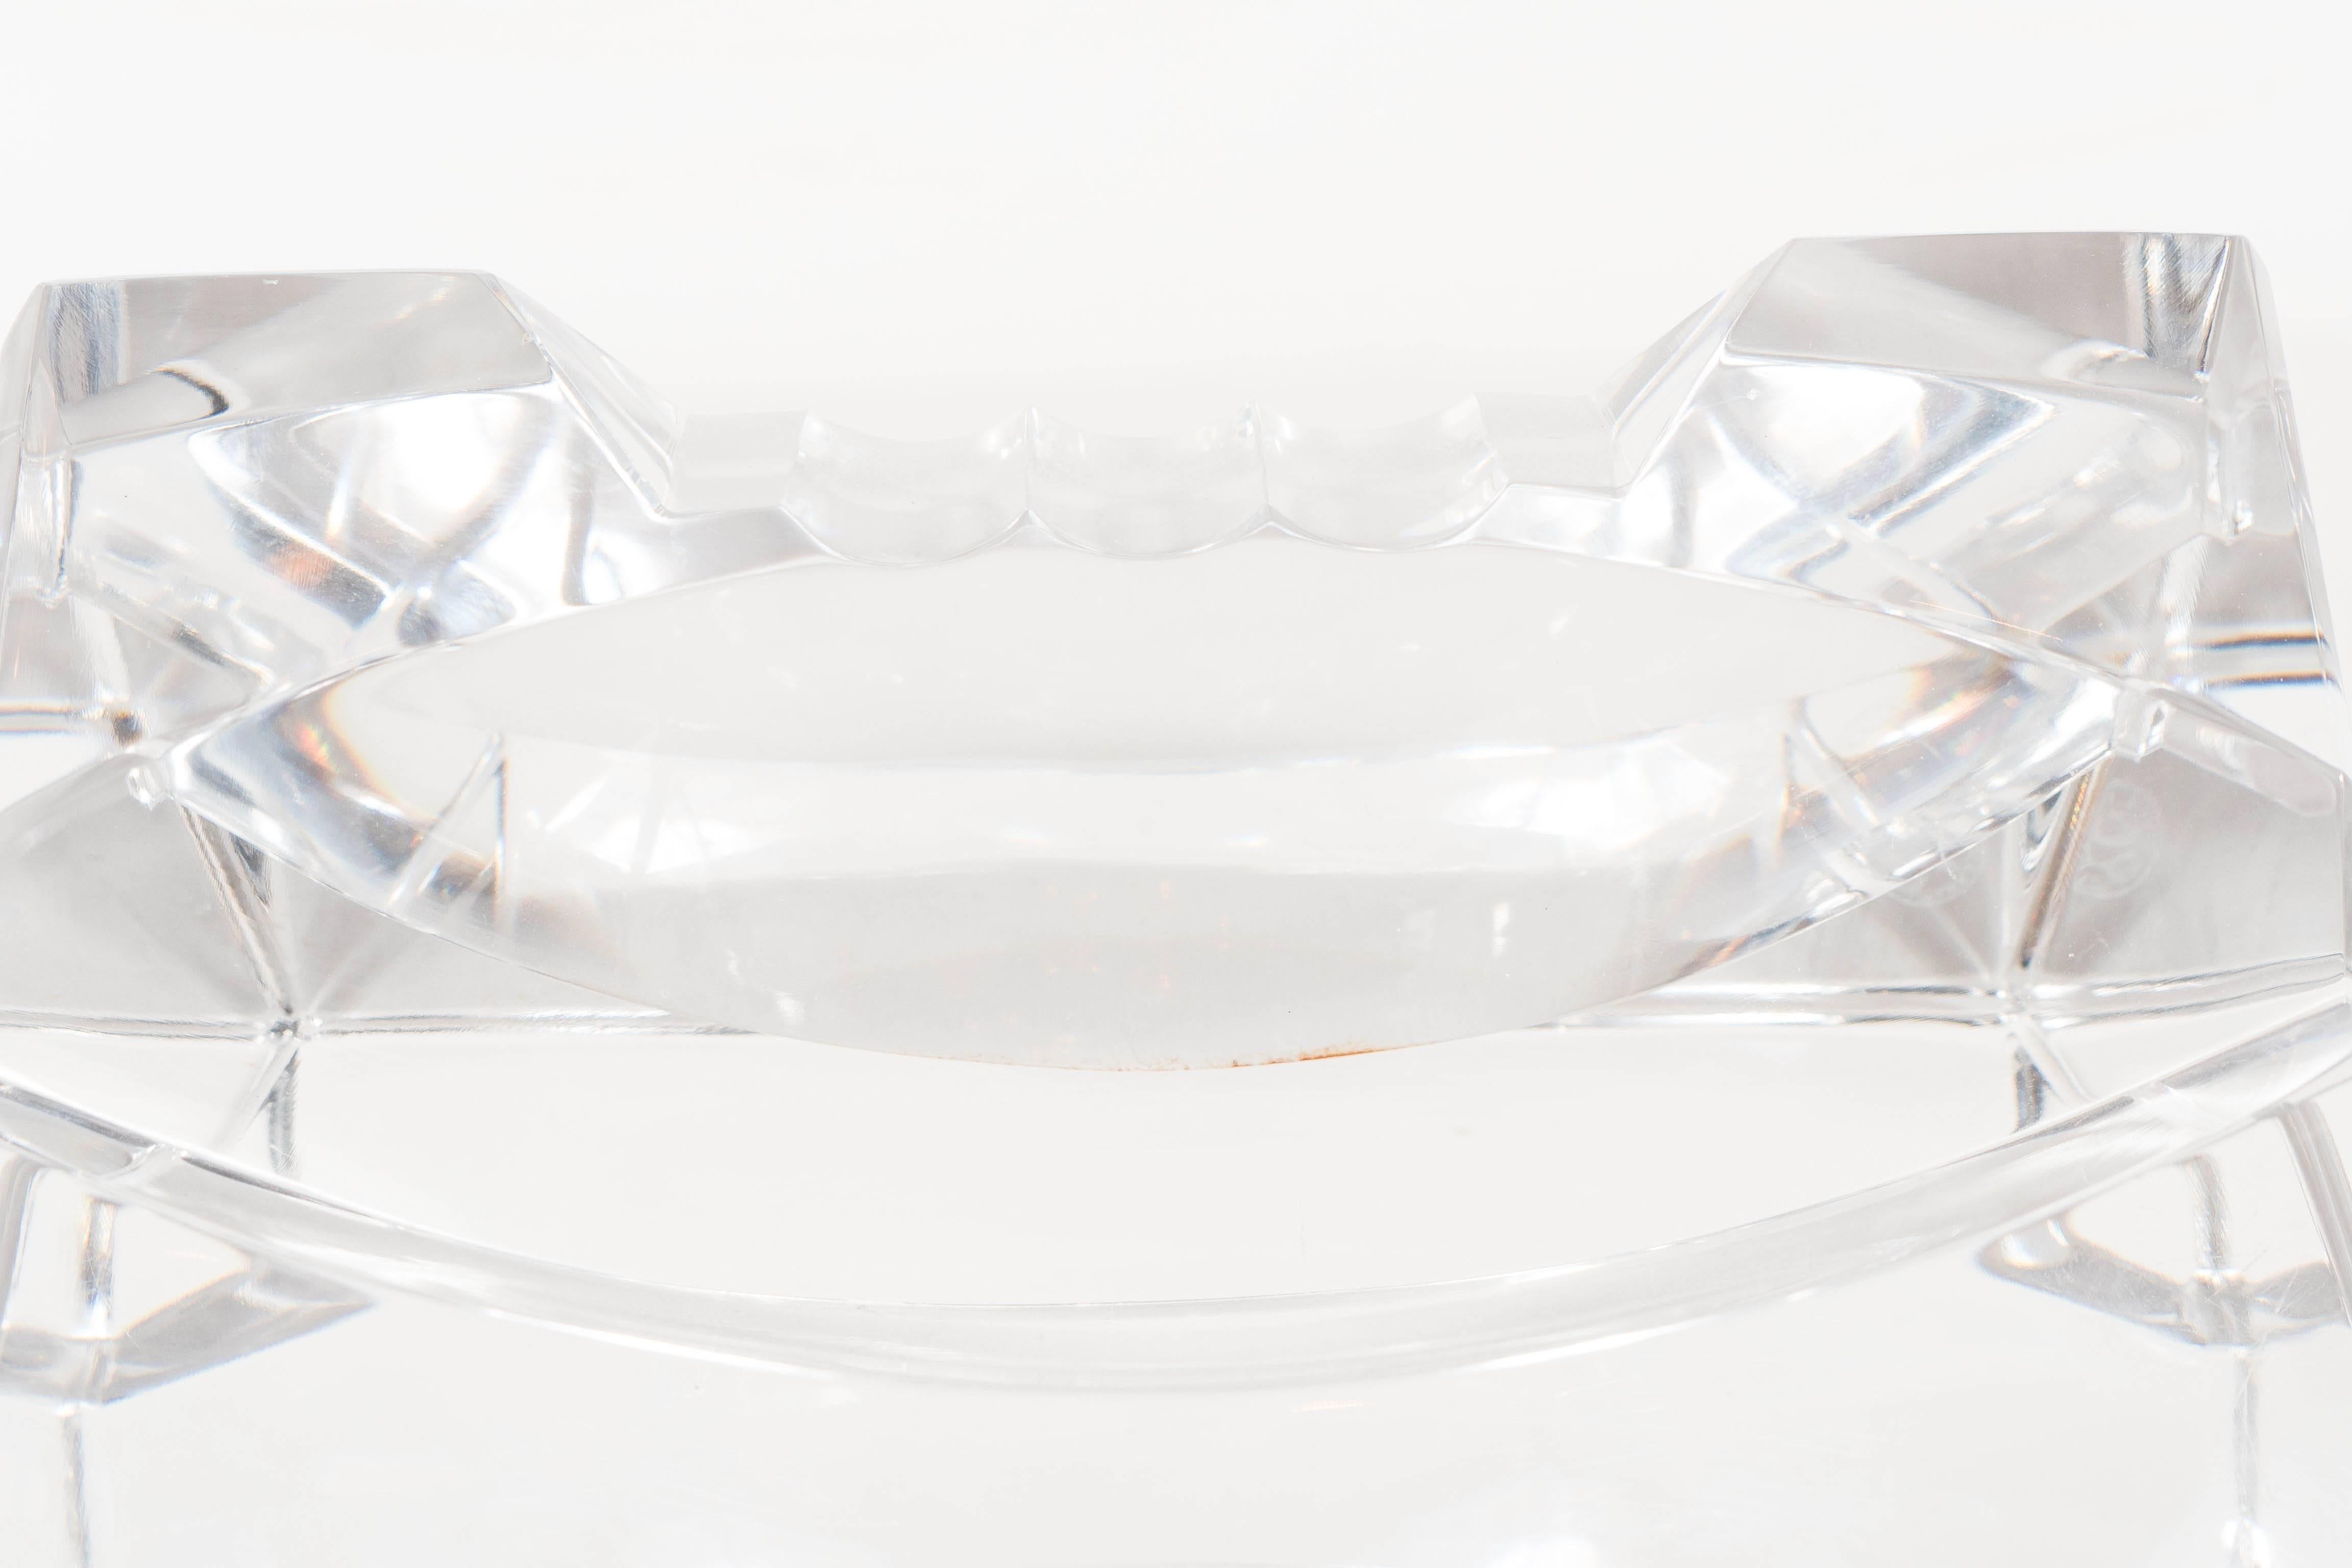 Crystal Exquisite Sculptural Baccarat Faceted Ashtray in Triangular Form